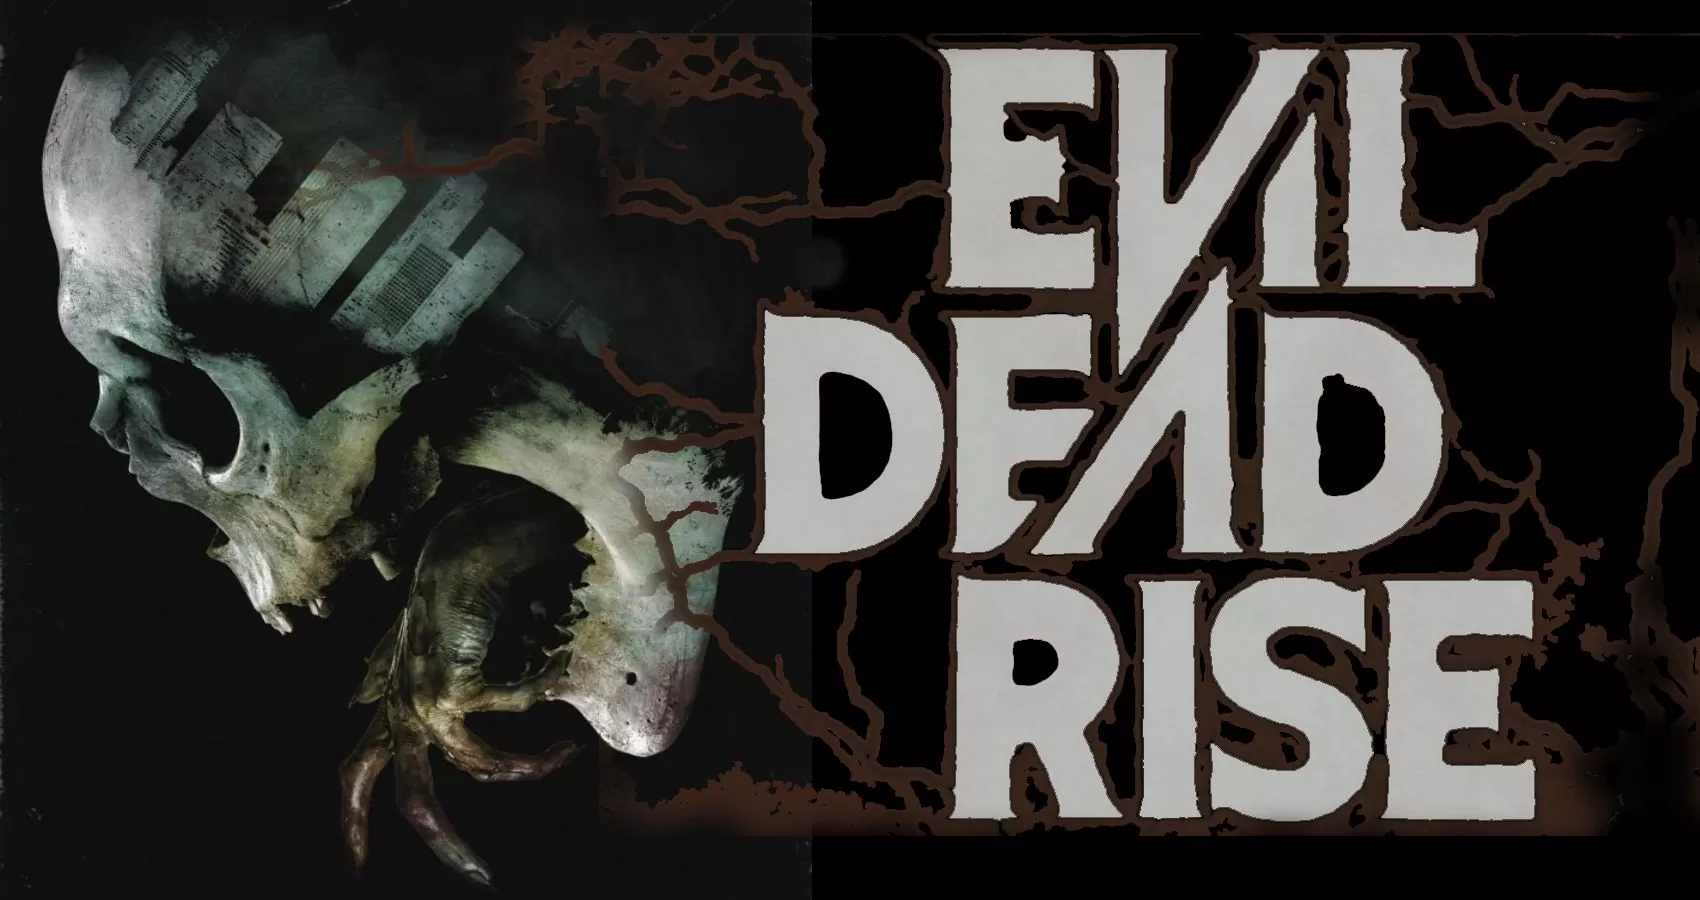 lee-cronin-shares-gory-evil-dead-rise-behind-the-scenes-picture